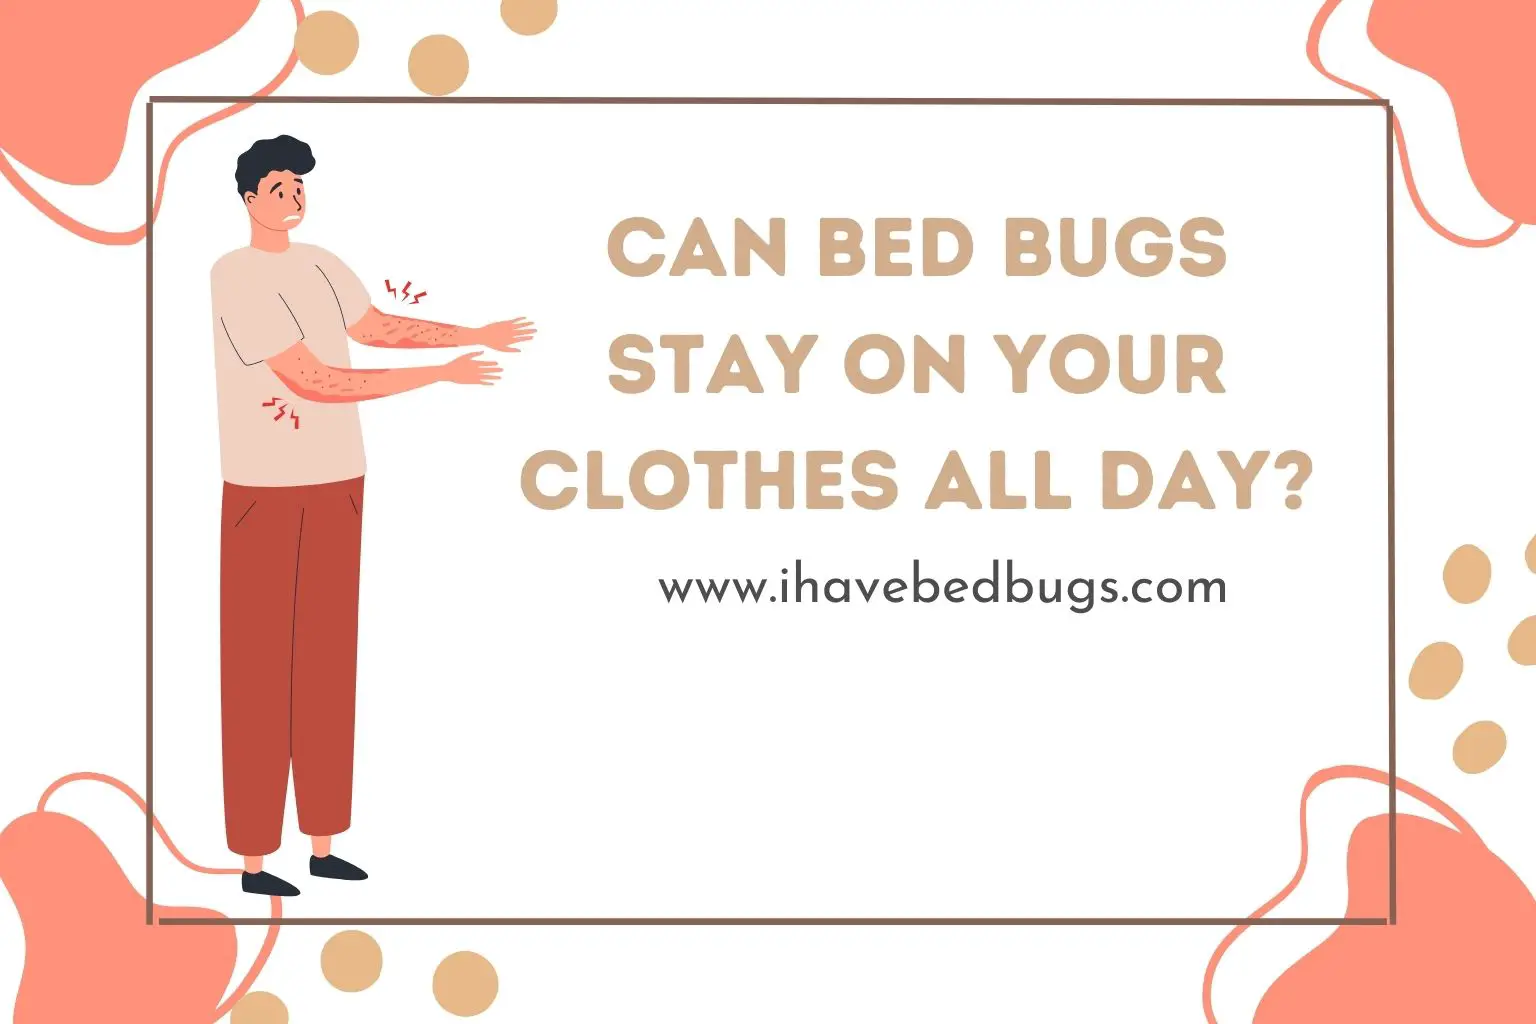 Can bed bugs stay on your clothes all day